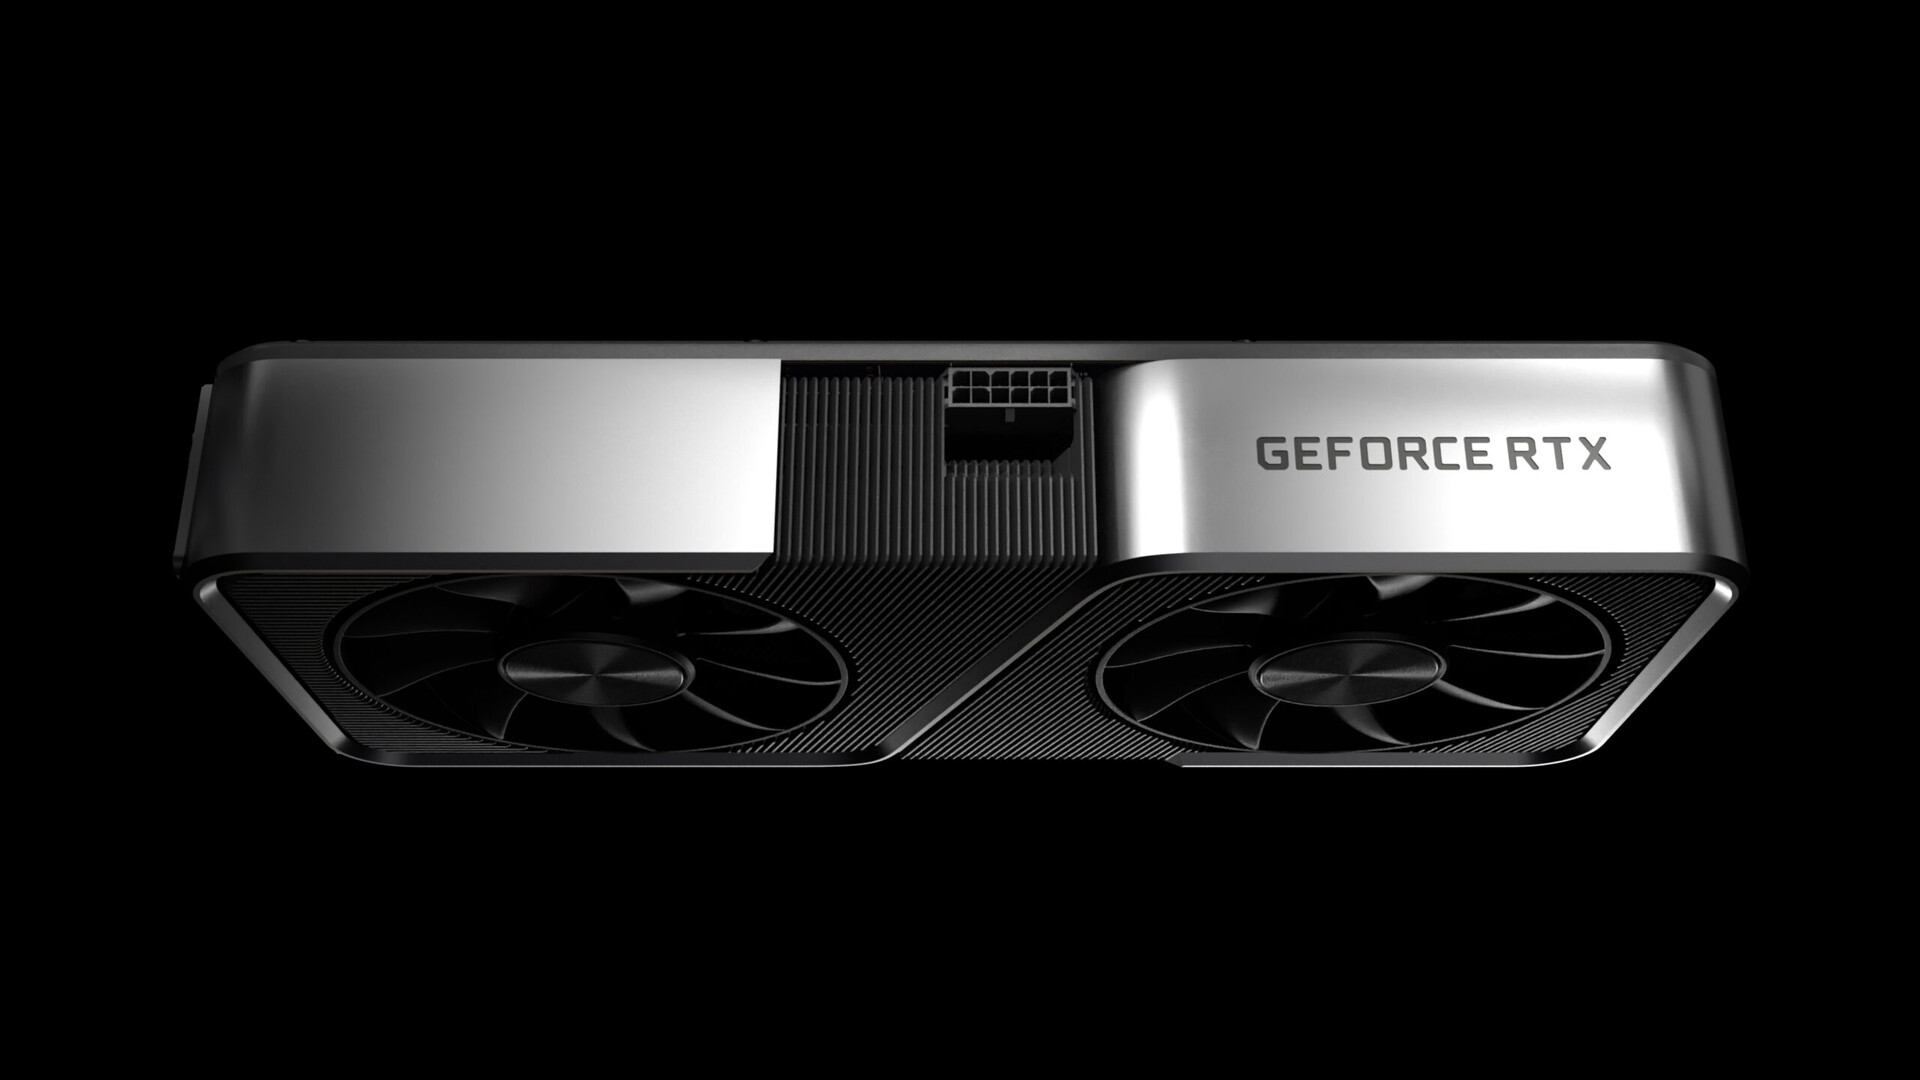 Leaked NVIDIA GeForce RTX 3080 Ti benchmarks show the GA102 card on par with the GeForce RTX 3090